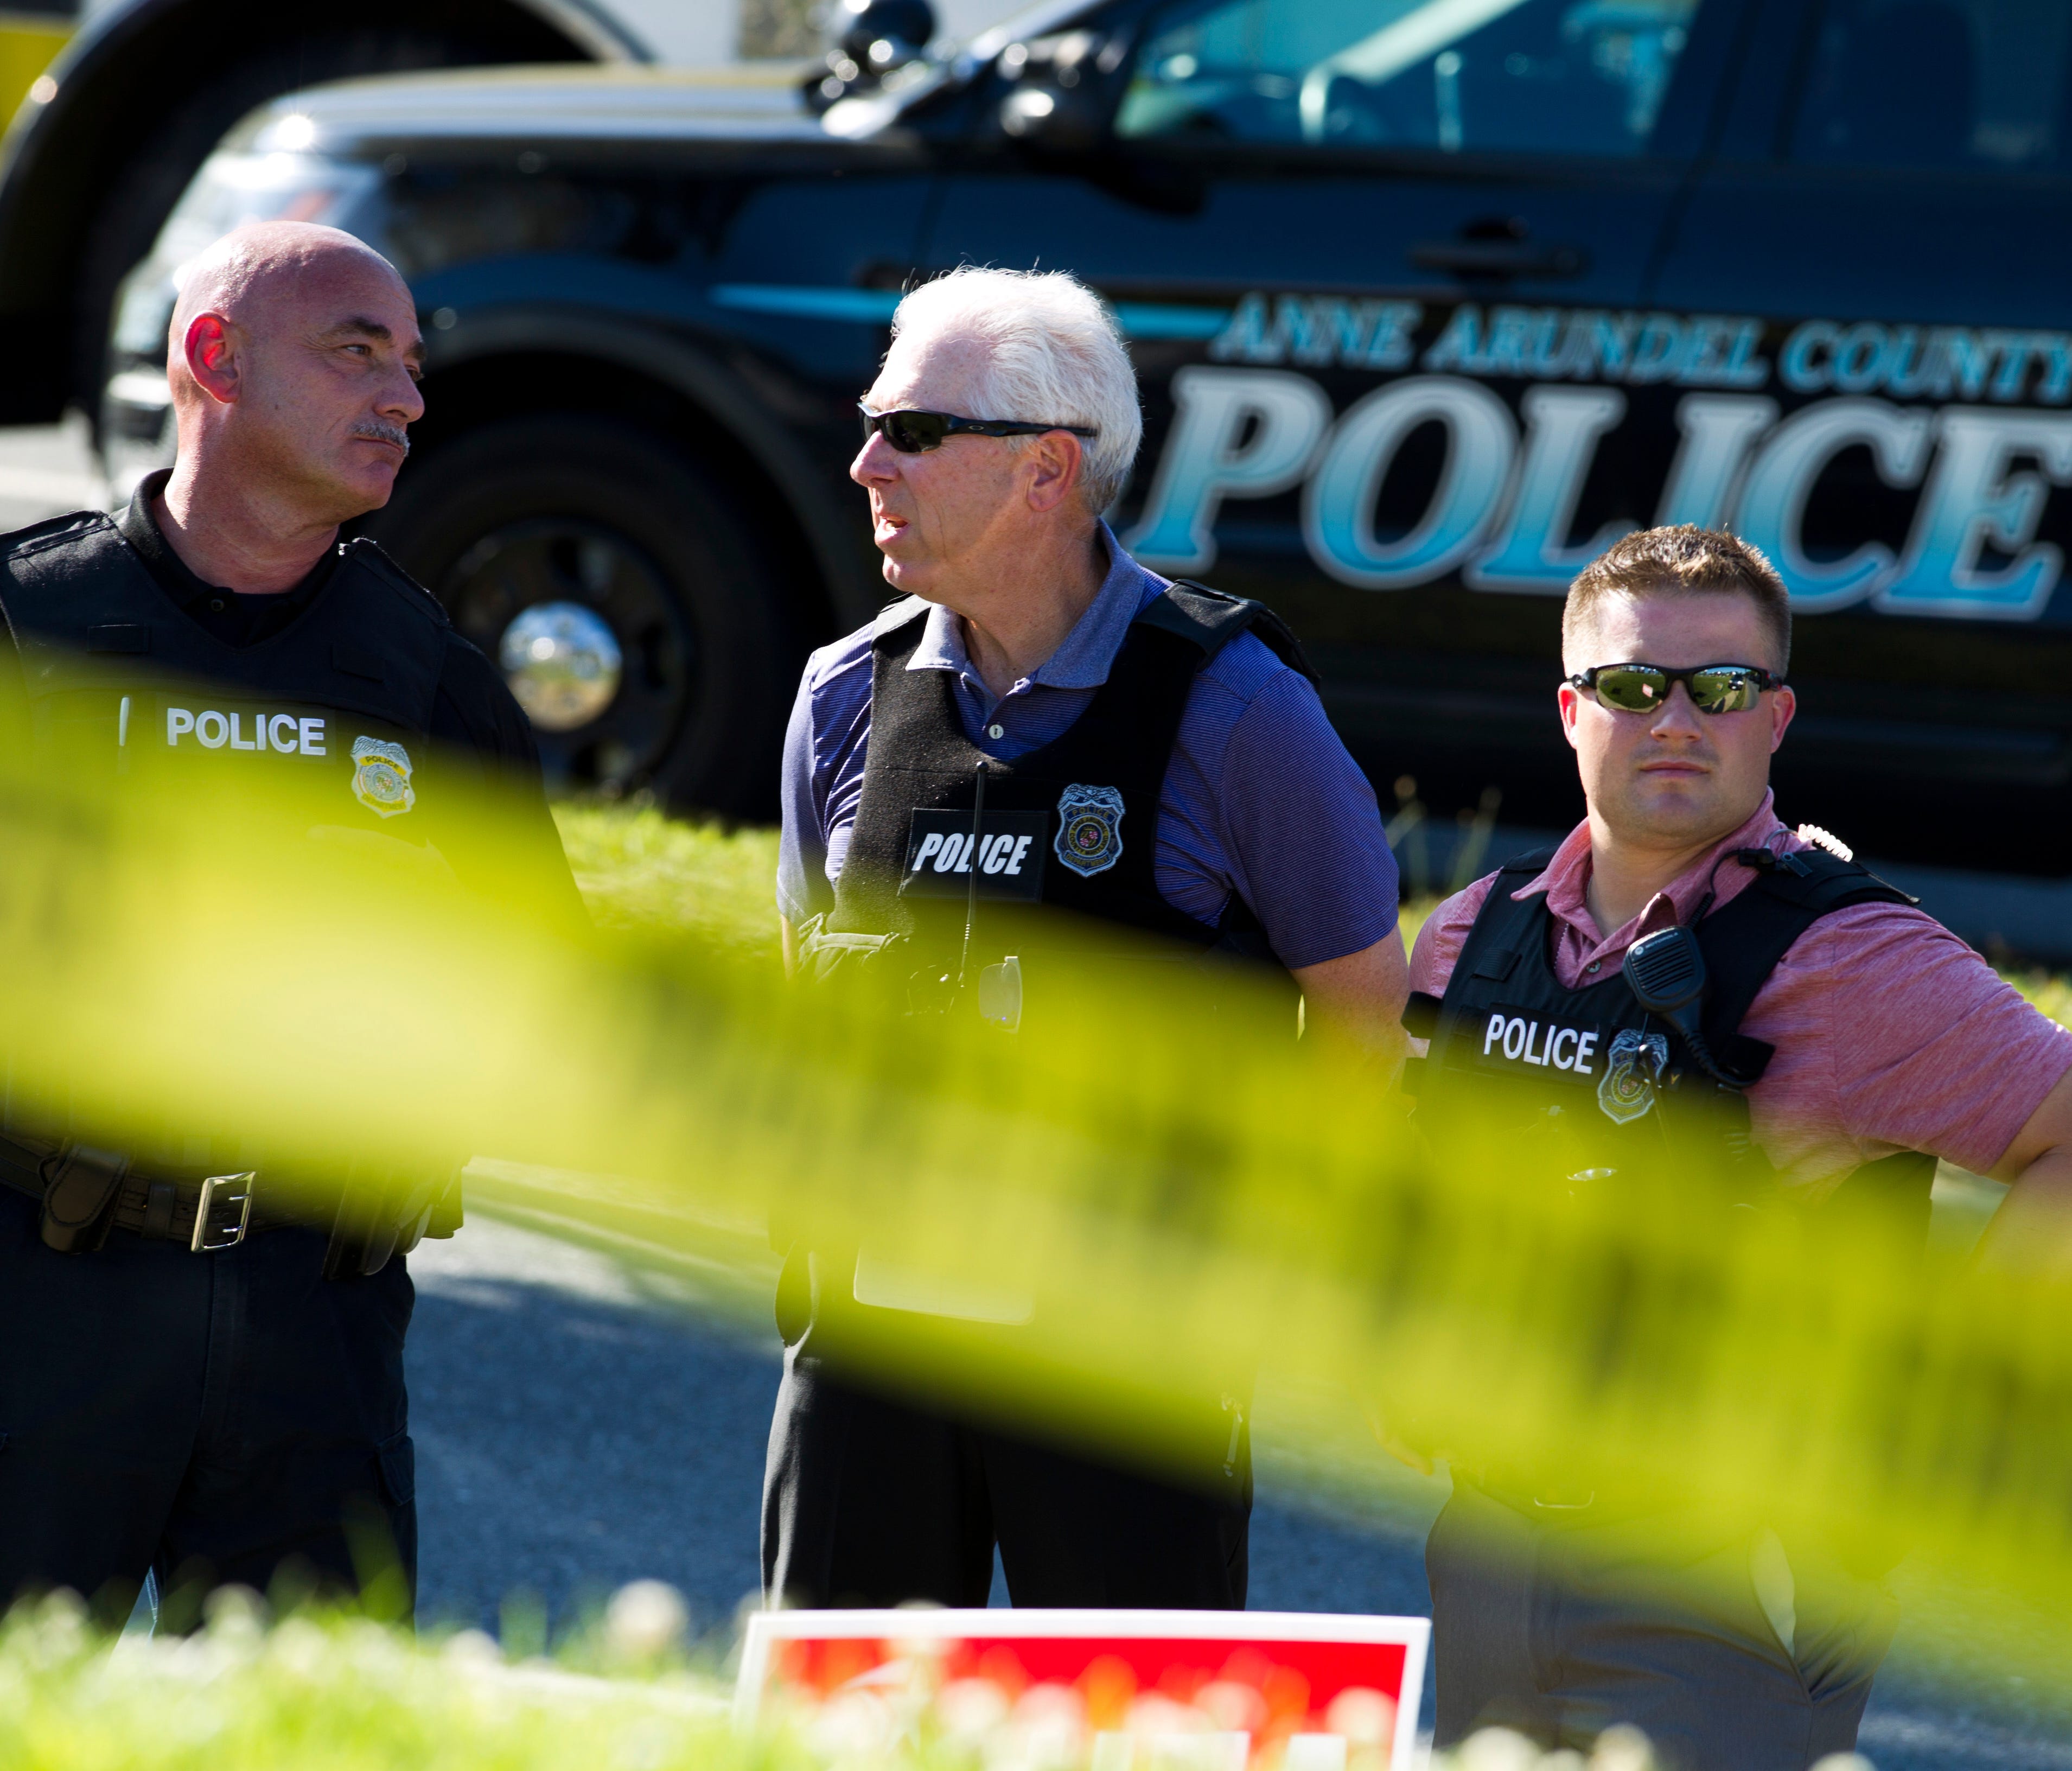 Police officers secure the area after multiple people were shot at an office building housing The Capital Gazette newspaper in Annapolis, Md. on June 28, 2018.